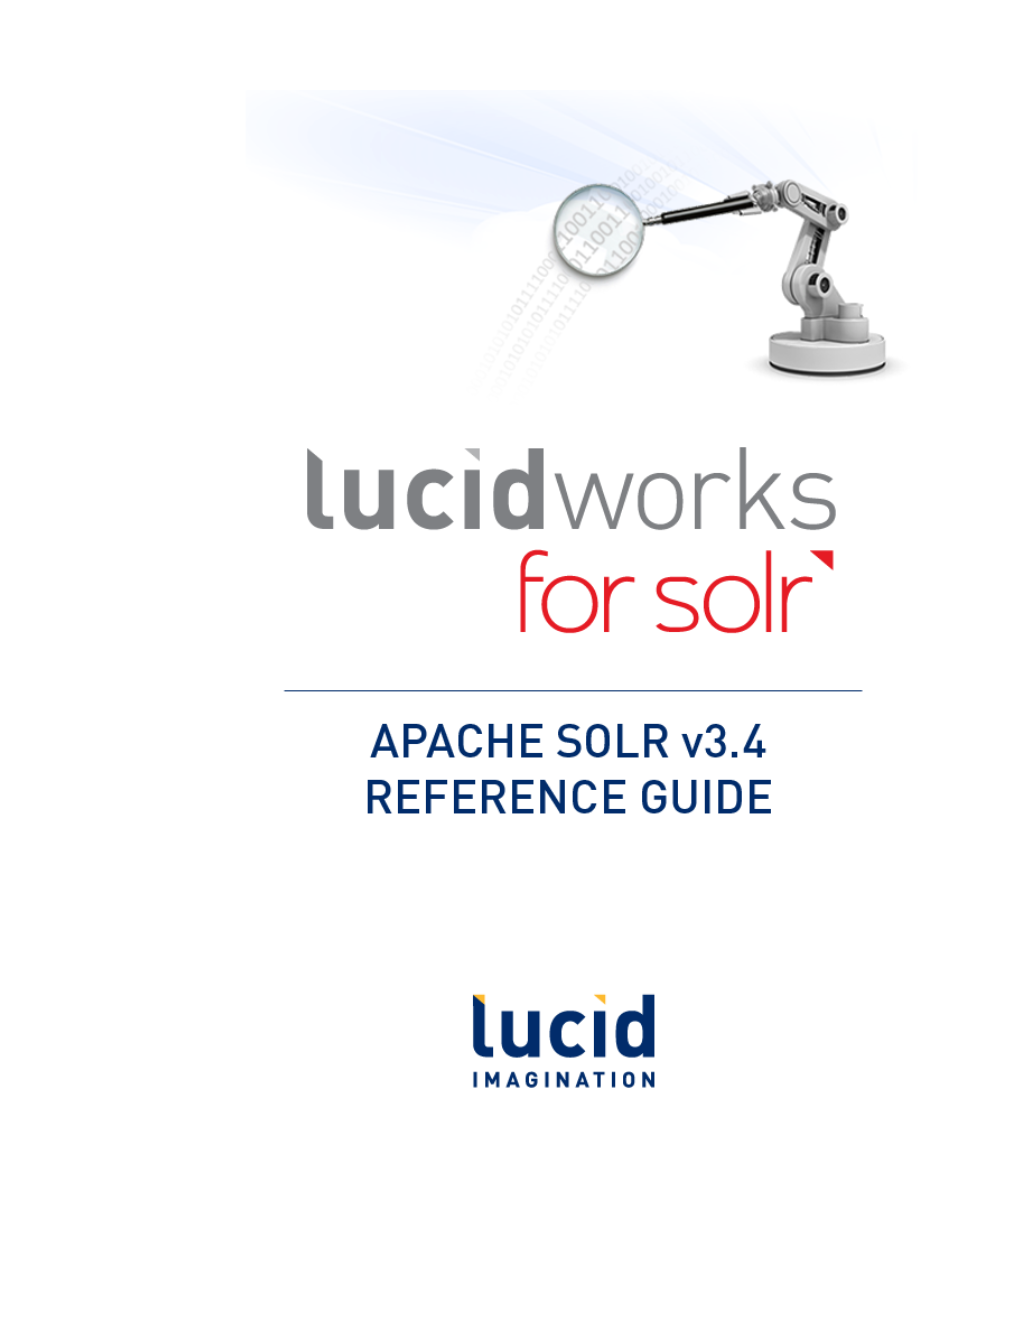 Apache Solr 3.4 Reference Guide